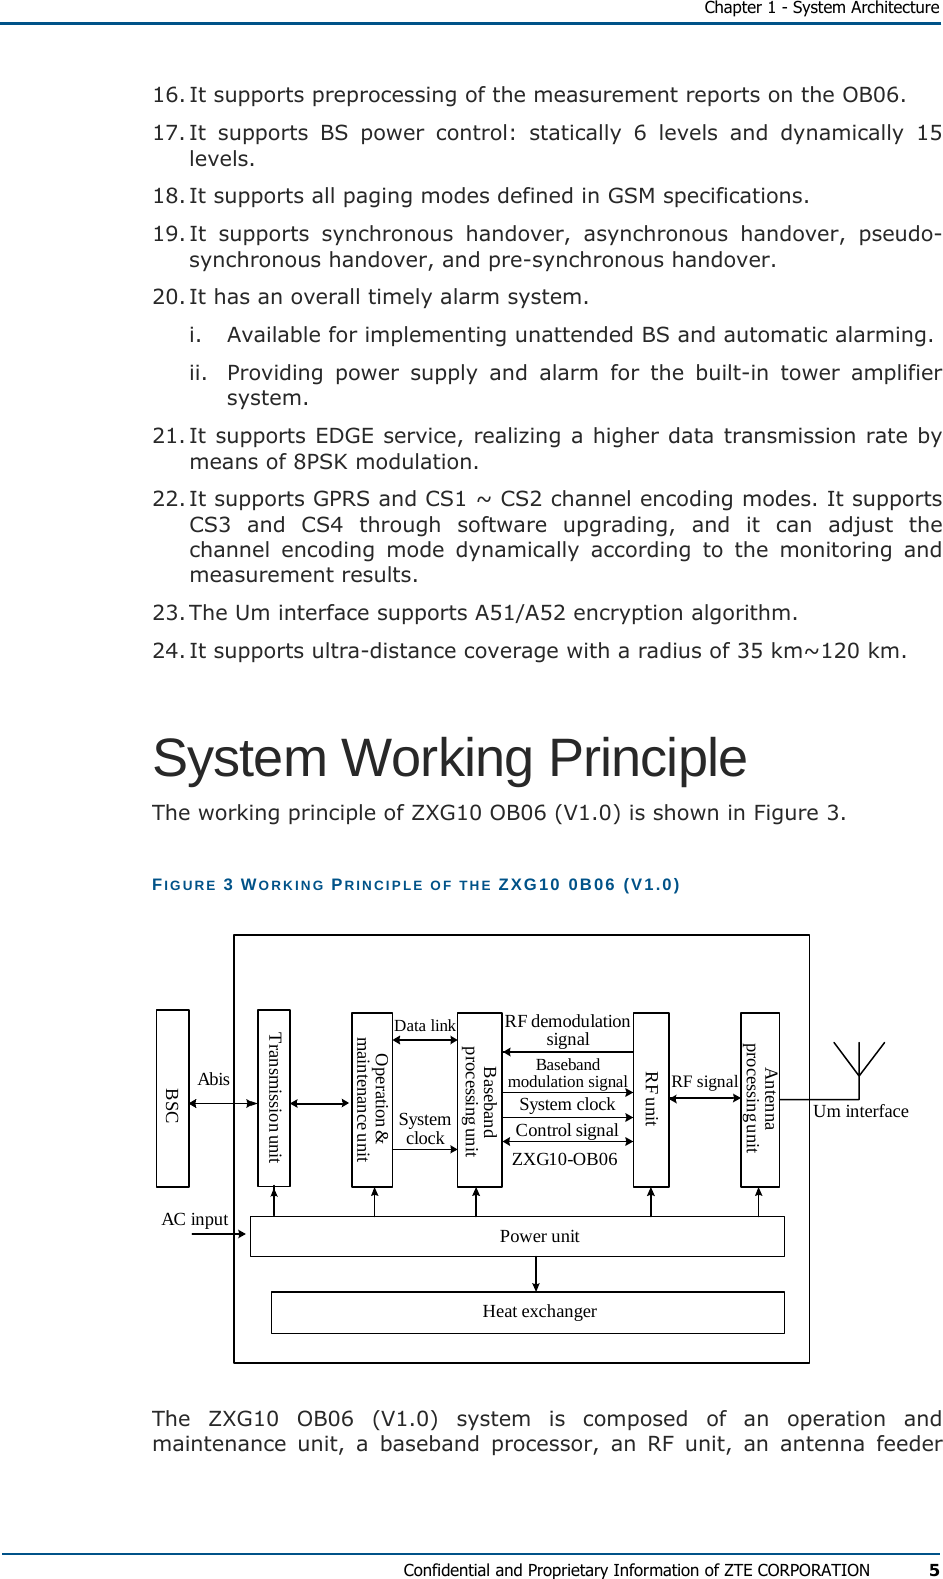   Chapter 1 - System Architecture Confidential and Proprietary Information of ZTE CORPORATION 5 16. It supports preprocessing of the measurement reports on the OB06. 17. It supports BS power control: statically 6 levels and dynamically 15 levels. 18. It supports all paging modes defined in GSM specifications. 19. It supports synchronous handover, asynchronous handover, pseudo-synchronous handover, and pre-synchronous handover. 20. It has an overall timely alarm system. i.  Available for implementing unattended BS and automatic alarming. ii.  Providing power supply and alarm for the built-in tower amplifier system. 21. It supports EDGE service, realizing a higher data transmission rate by means of 8PSK modulation. 22. It supports GPRS and CS1 ~ CS2 channel encoding modes. It supports CS3 and CS4 through software upgrading, and it can adjust the channel encoding mode dynamically according to the monitoring and measurement results. 23. The Um interface supports A51/A52 encryption algorithm. 24. It supports ultra-distance coverage with a radius of 35 km~120 km. System Working Principle The working principle of ZXG10 OB06 (V1.0) is shown in Figure 3. FIGURE 3 WORKING PRINCIPLE OF THE ZXG10 0B06 (V1.0)         ZXG10-OB06Operation &amp;maintenance unitBasebandprocessing unitRF unitAntennaprocessing unitPower unitHeat exchangerAC inputData linkSystemclockRF demodulationsignalBasebandmodulation signalSystem clockControl signalRF signalUm interfaceTransmission unitBSCAbis The ZXG10 OB06 (V1.0) system is composed of an operation and maintenance unit, a baseband processor, an RF unit, an antenna feeder 